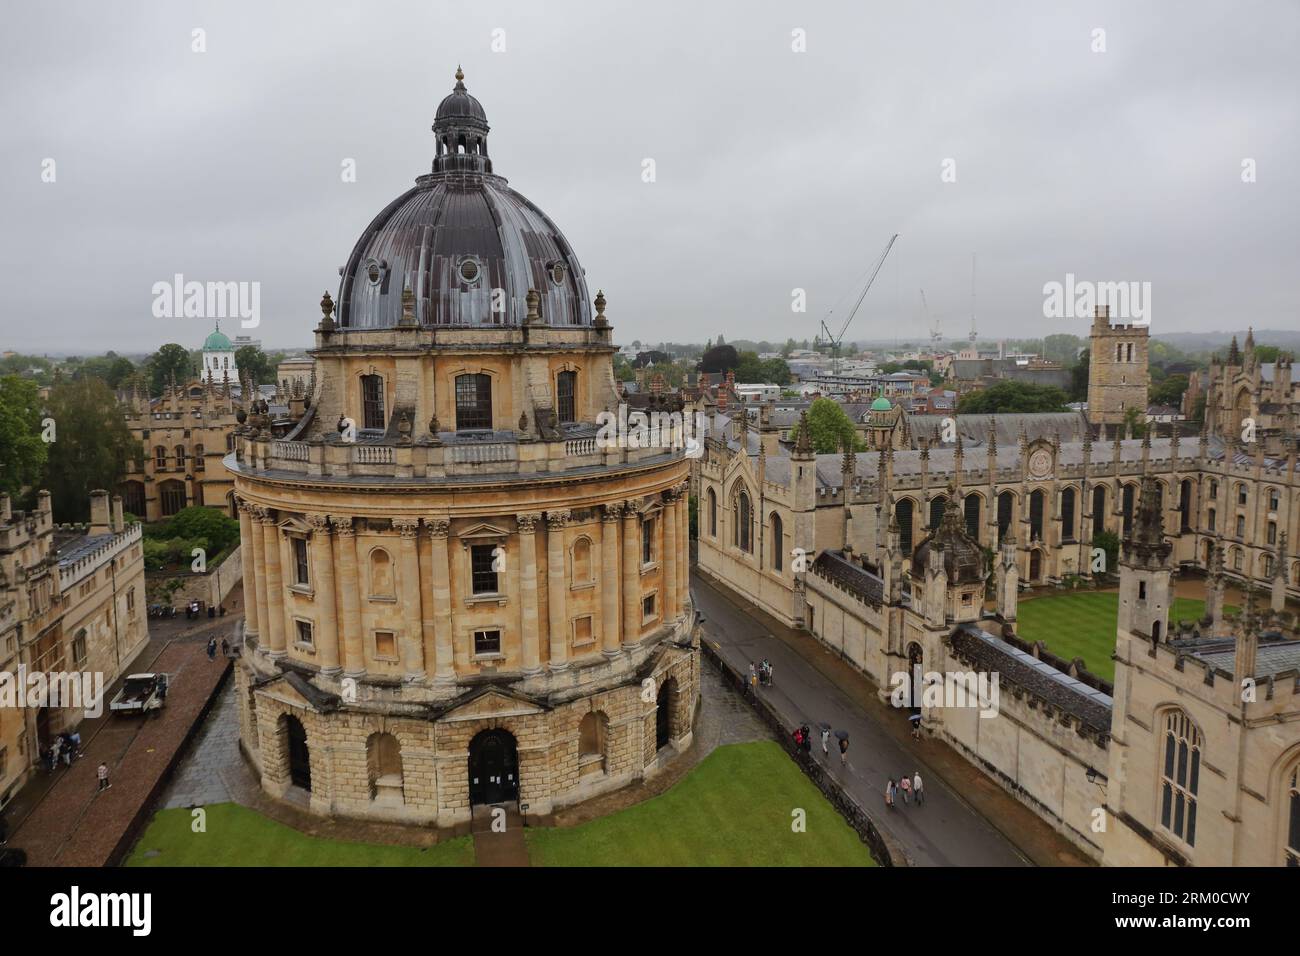 The view of Radcliffe Camera and Oxford from St. Mary's Church, Oxford, England, United Kingdom. Stock Photo